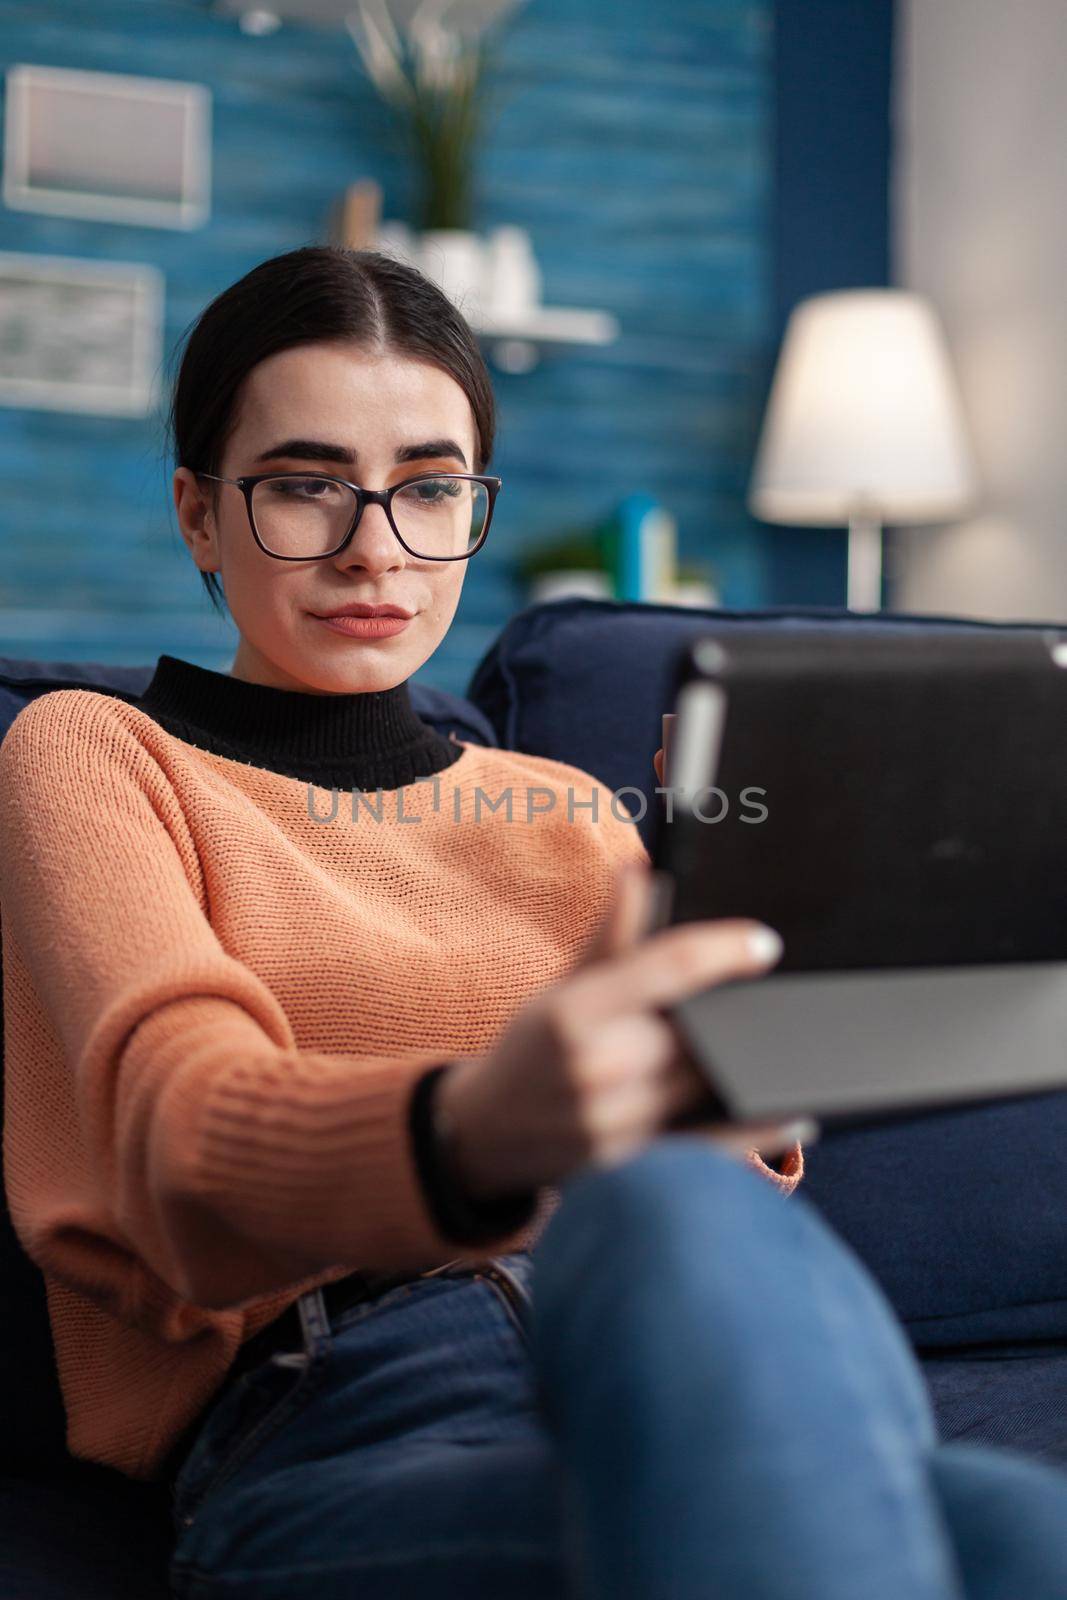 Portrait of student looking at tablet computer screen by DCStudio